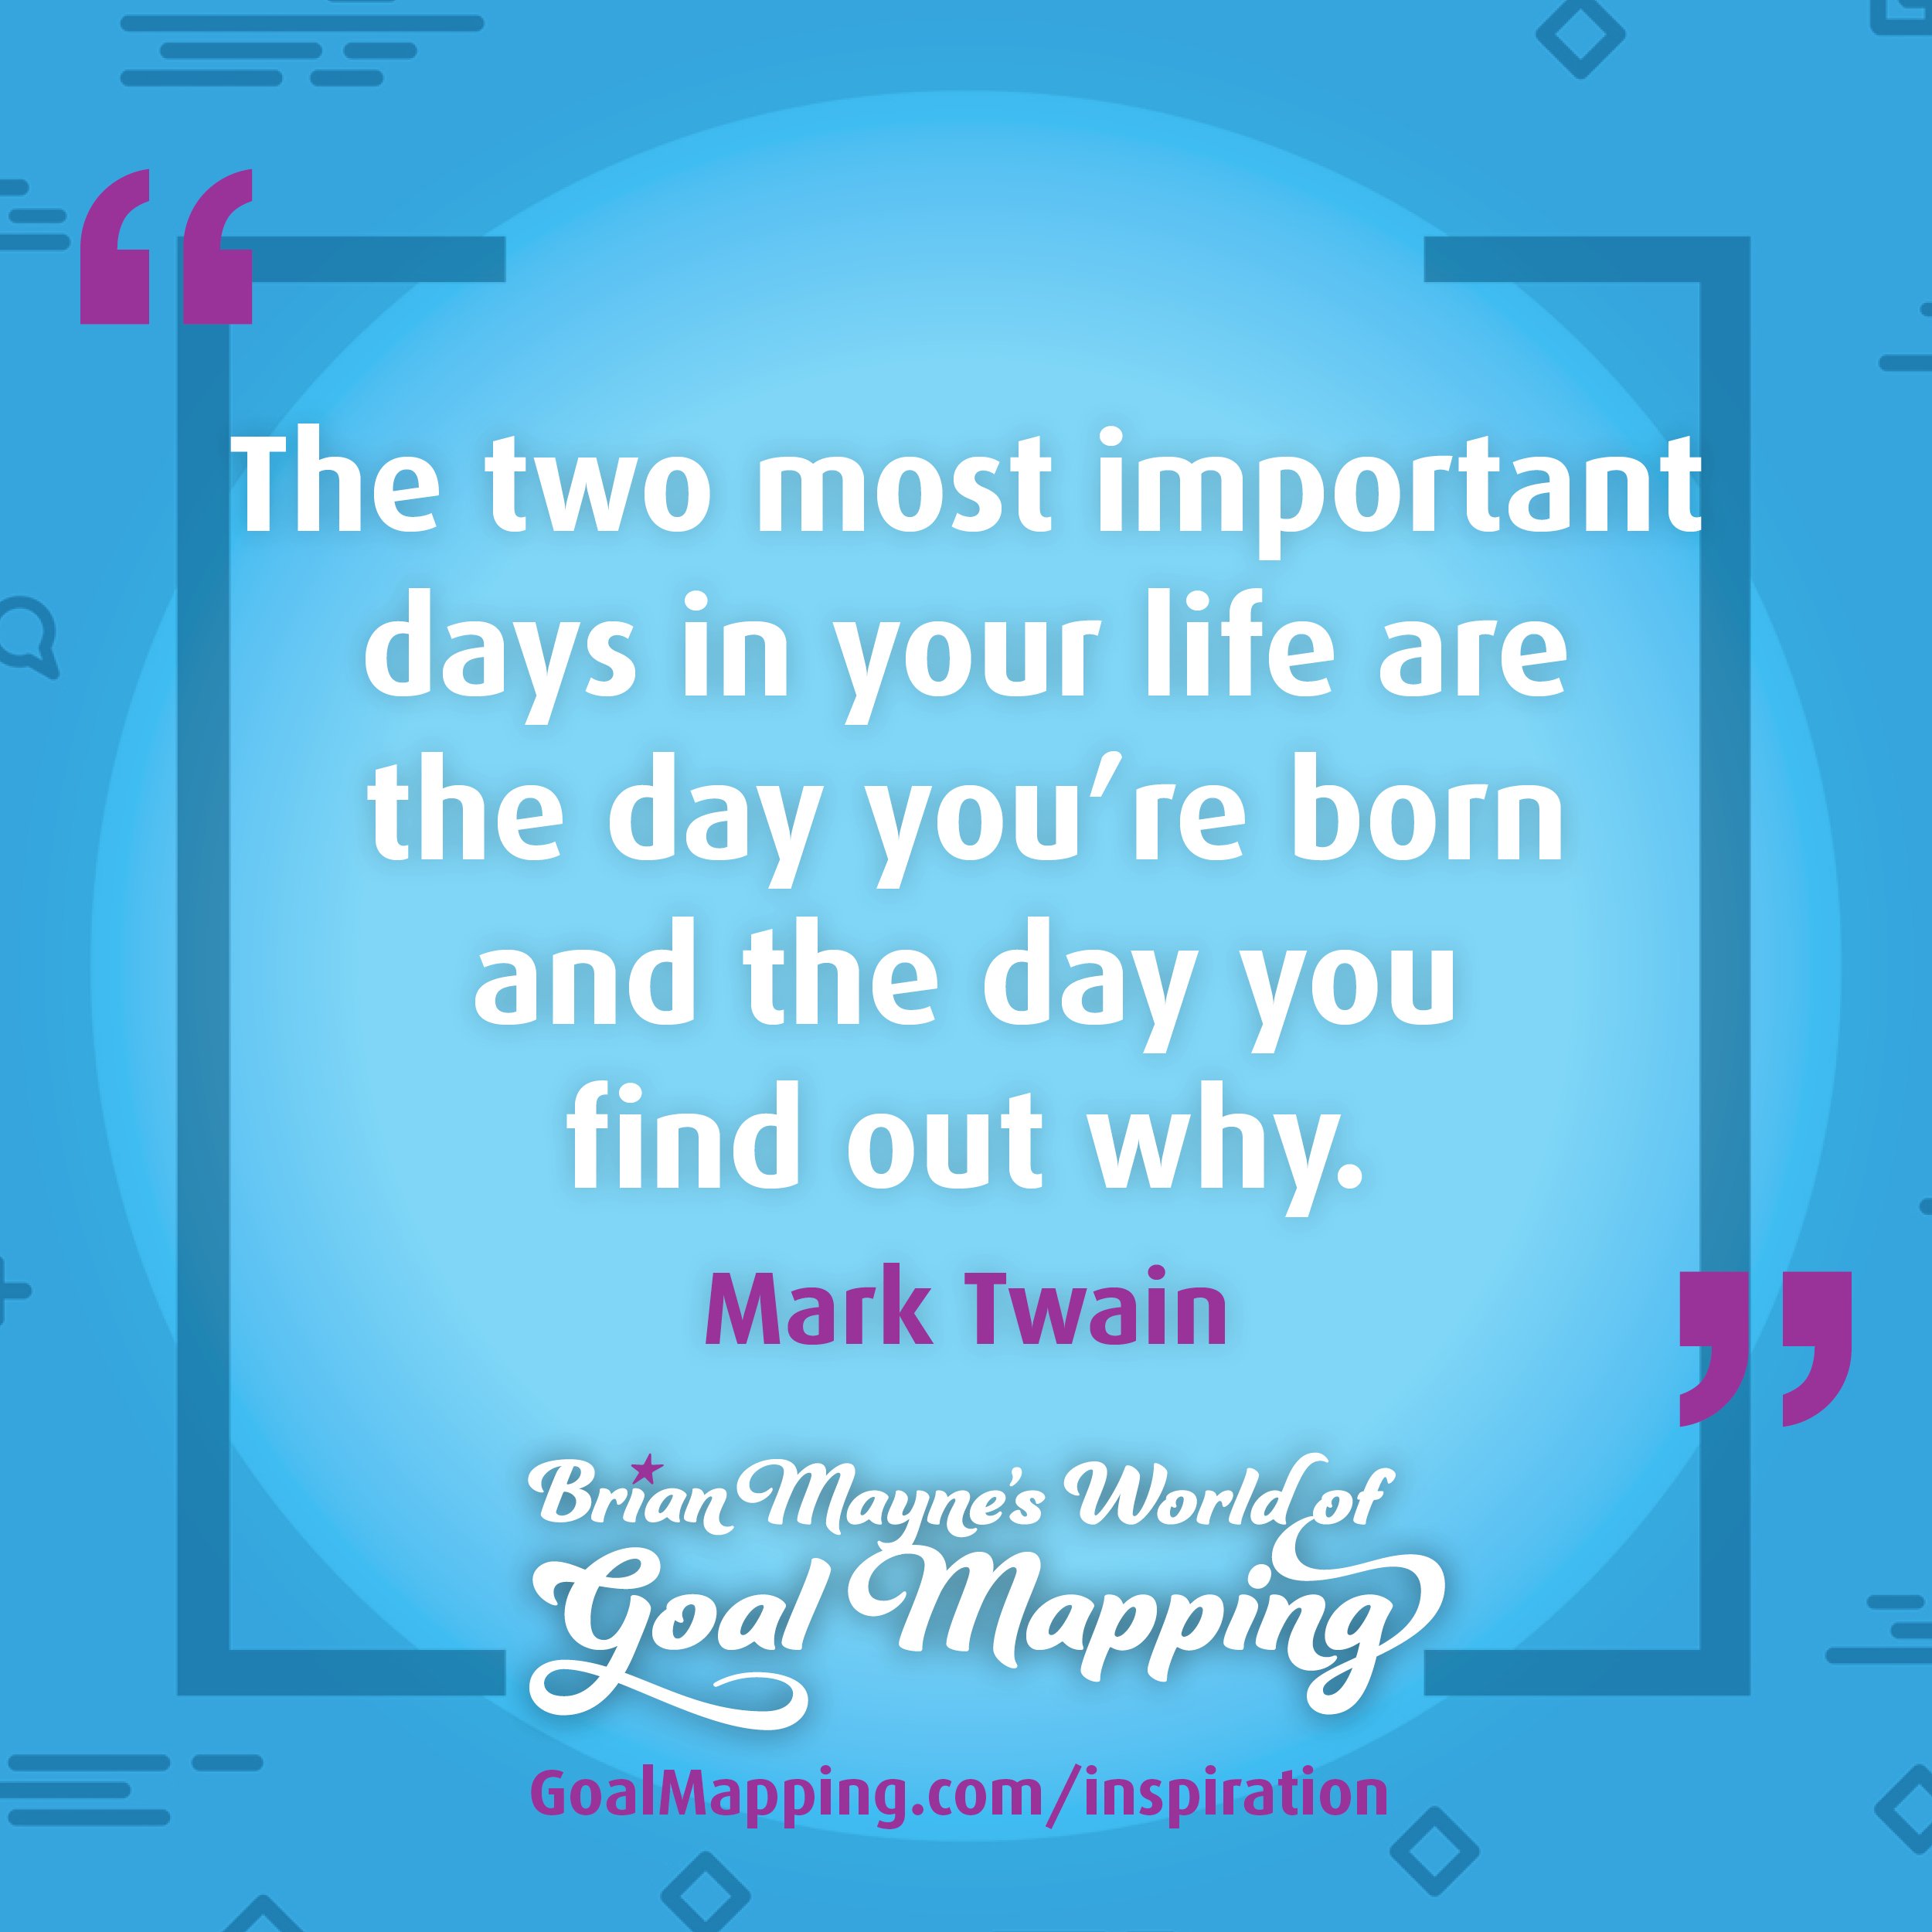 "The two most important days in your life are the day you’re born and the day you find out why."   Mark Twain